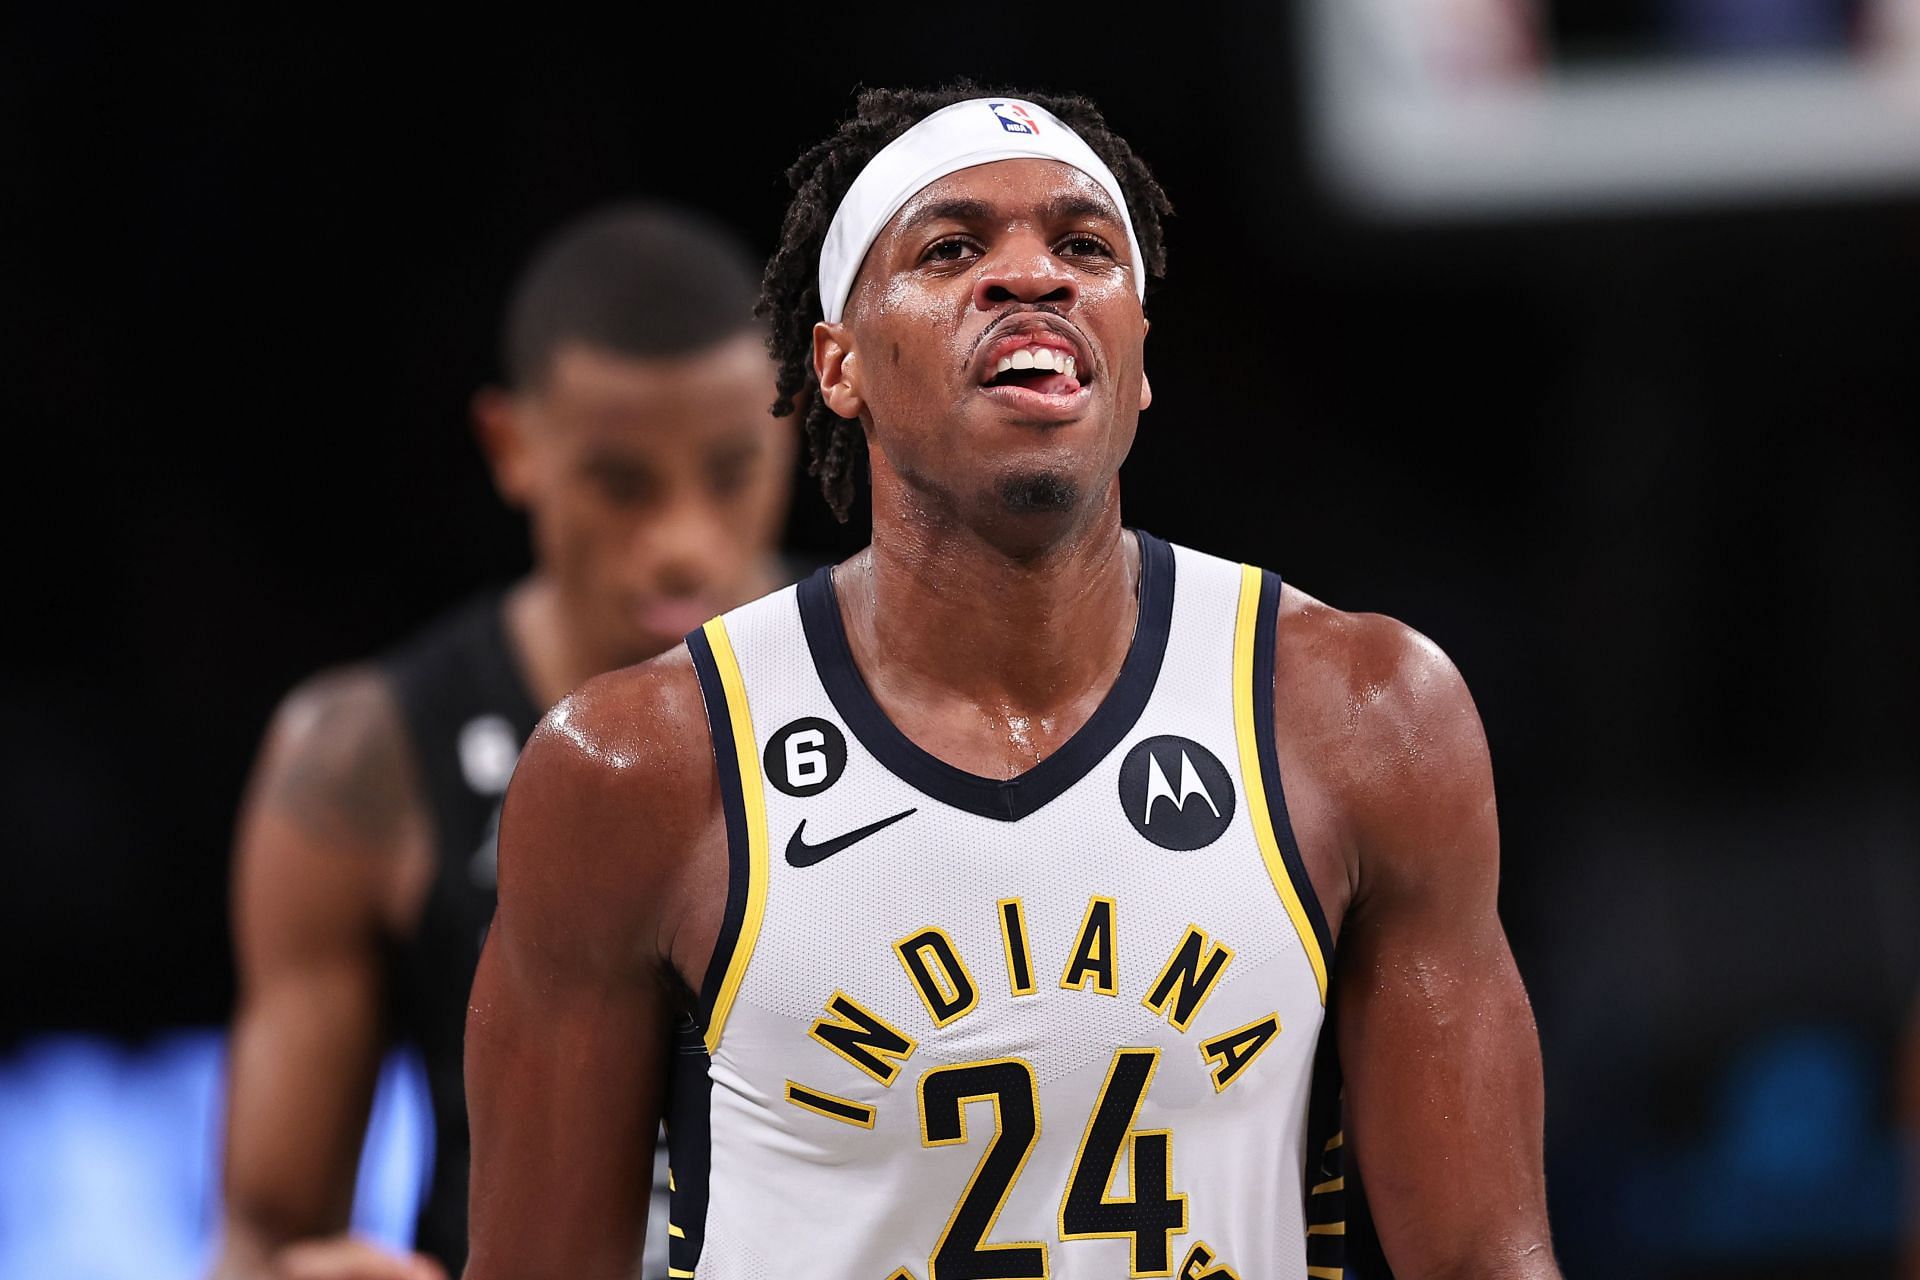 Indiana Pacers shooting guard Buddy Hield